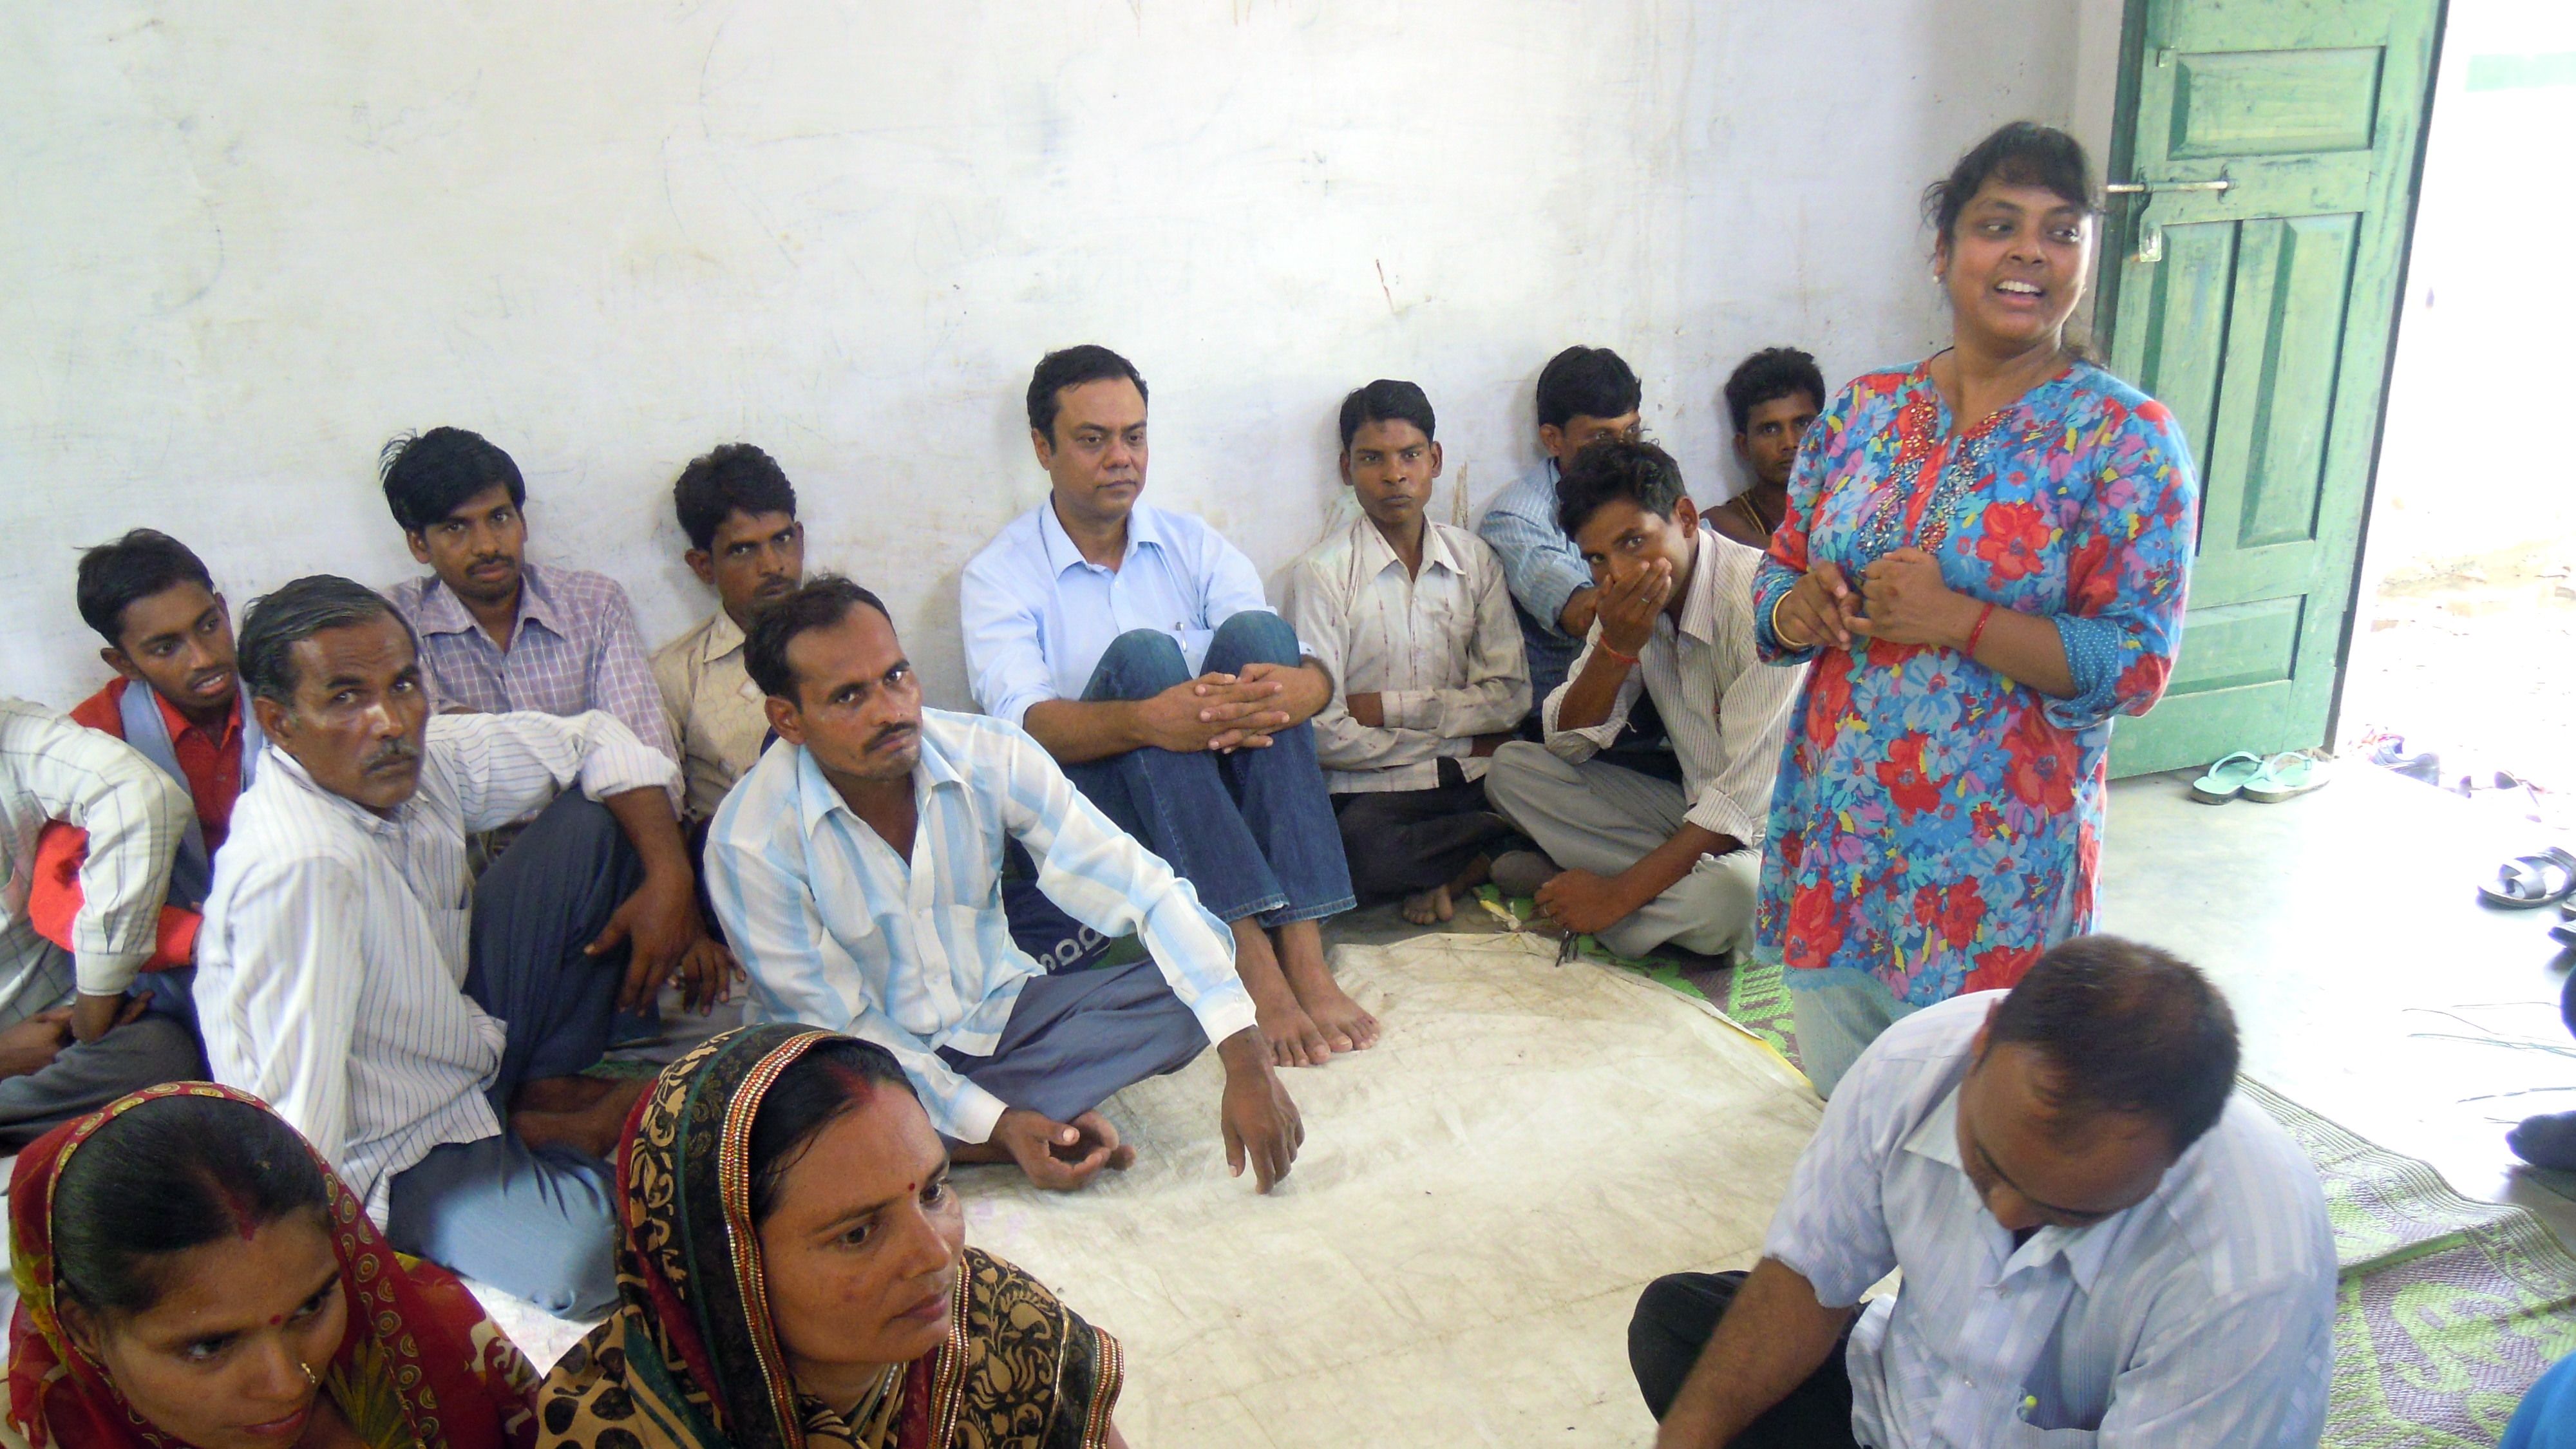 Suniti Neogy, the writer, at a community meeting in the village of Musepur in India, where she discussed the importance of men taking an active role in parenting.